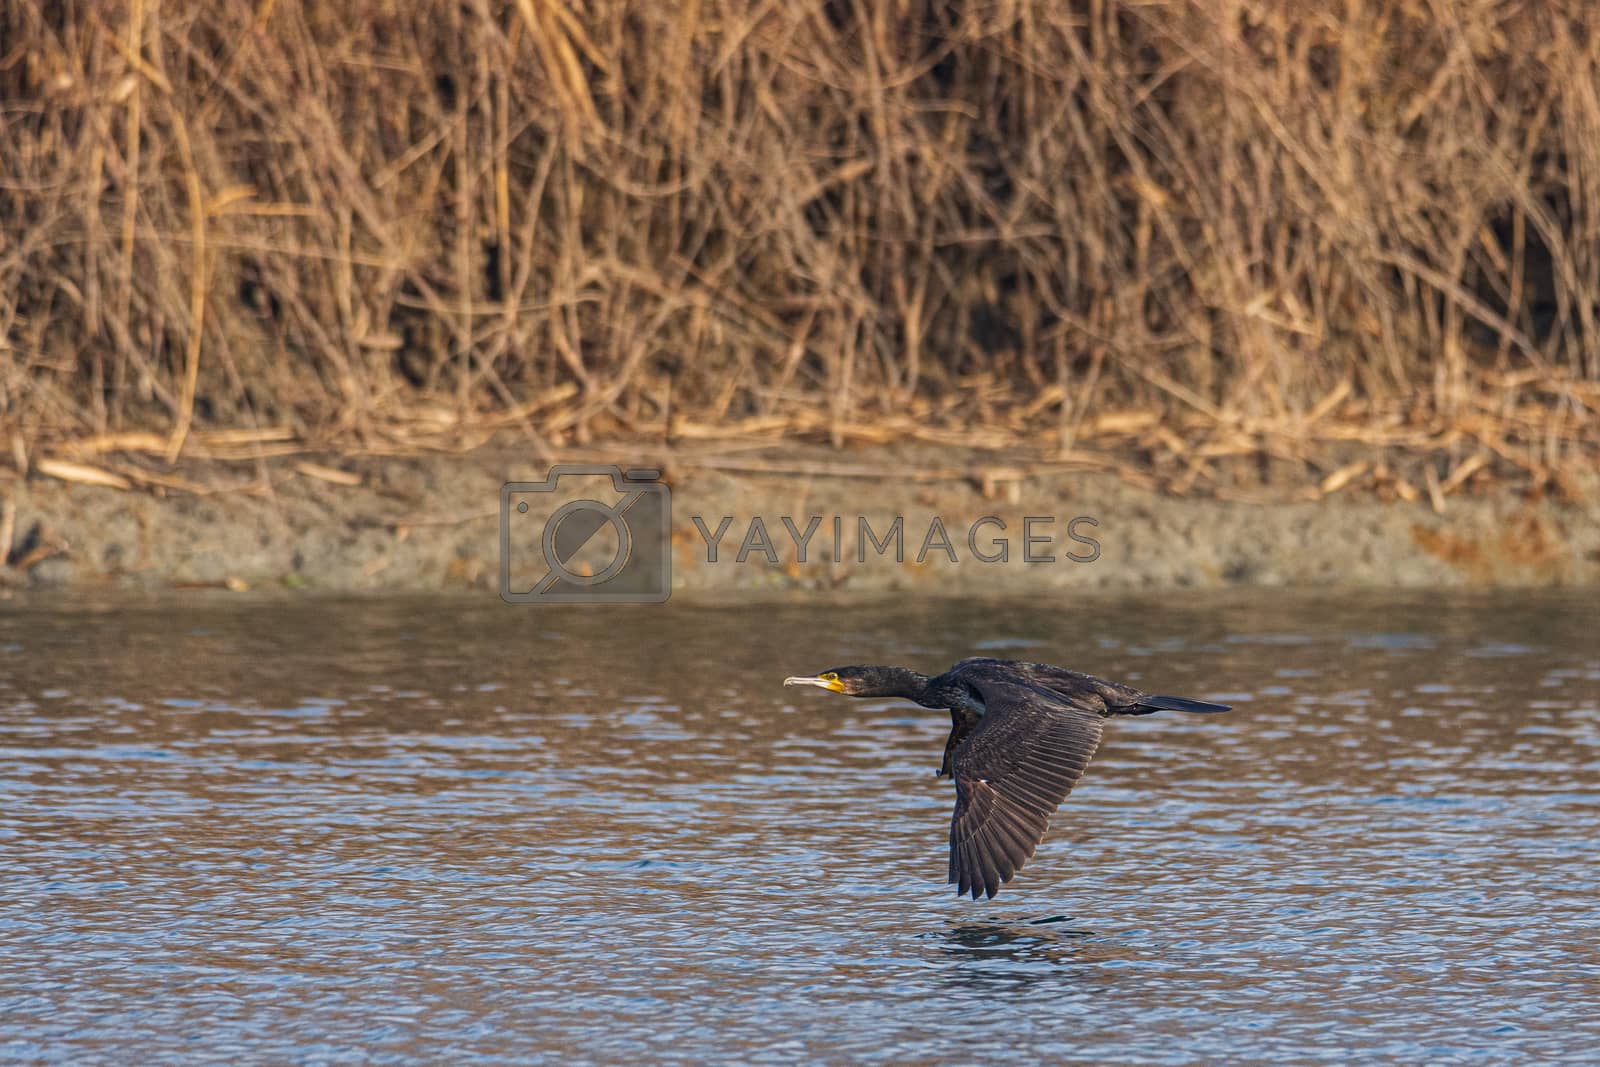 Royalty free image of The great cormorant flies at water level over a river in the ear by brambillasimone